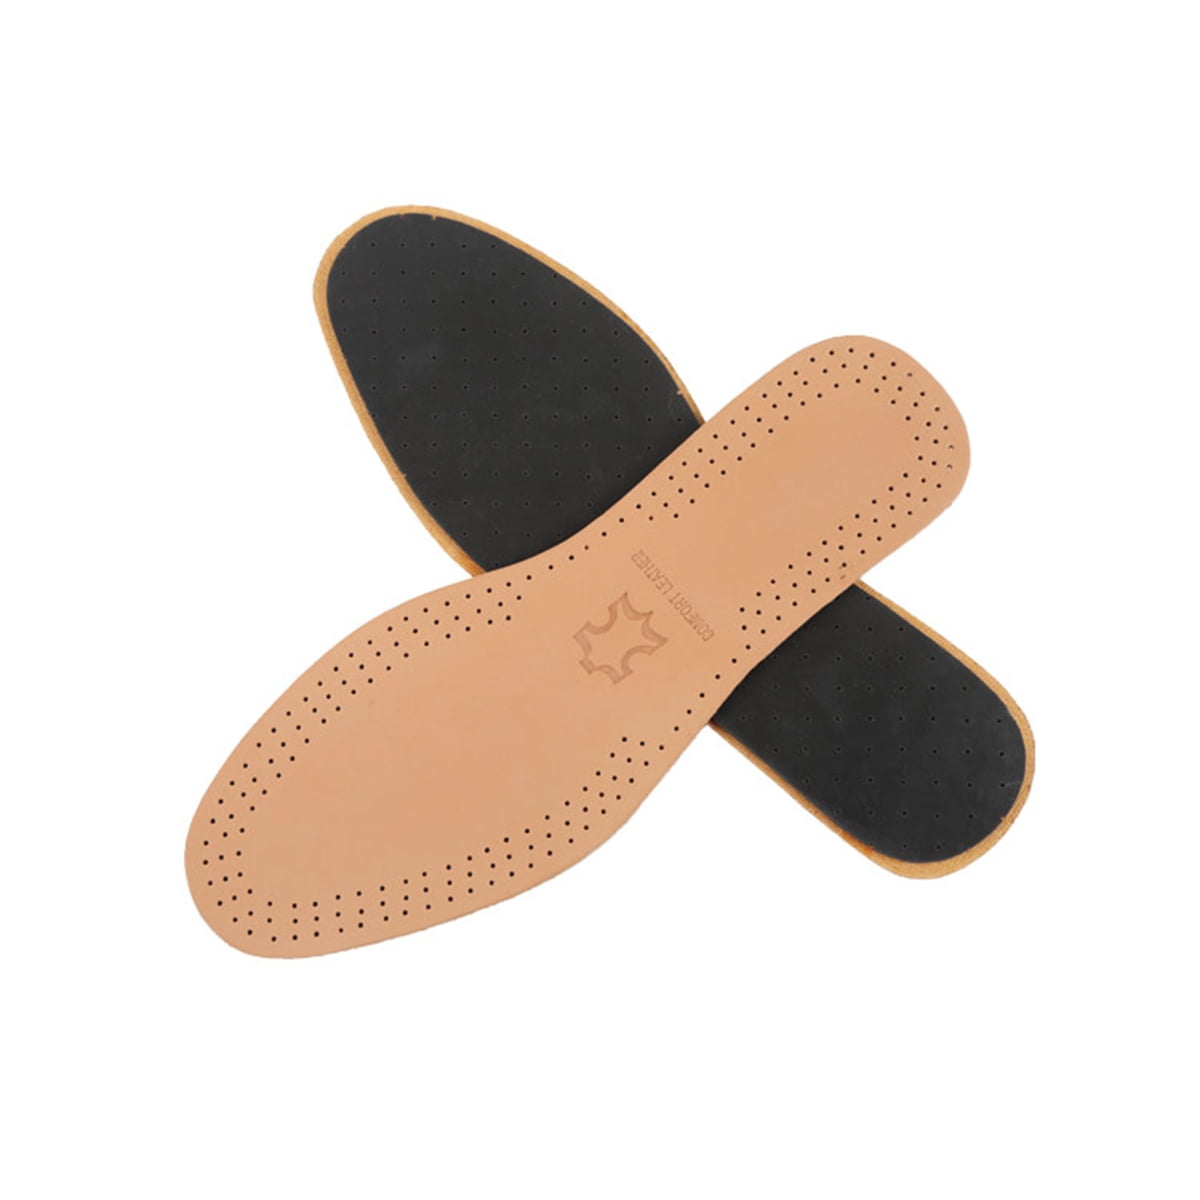 EVA Sports Insoles Shock Absorption Breathable Pads Deodorant Foot Care Brown 